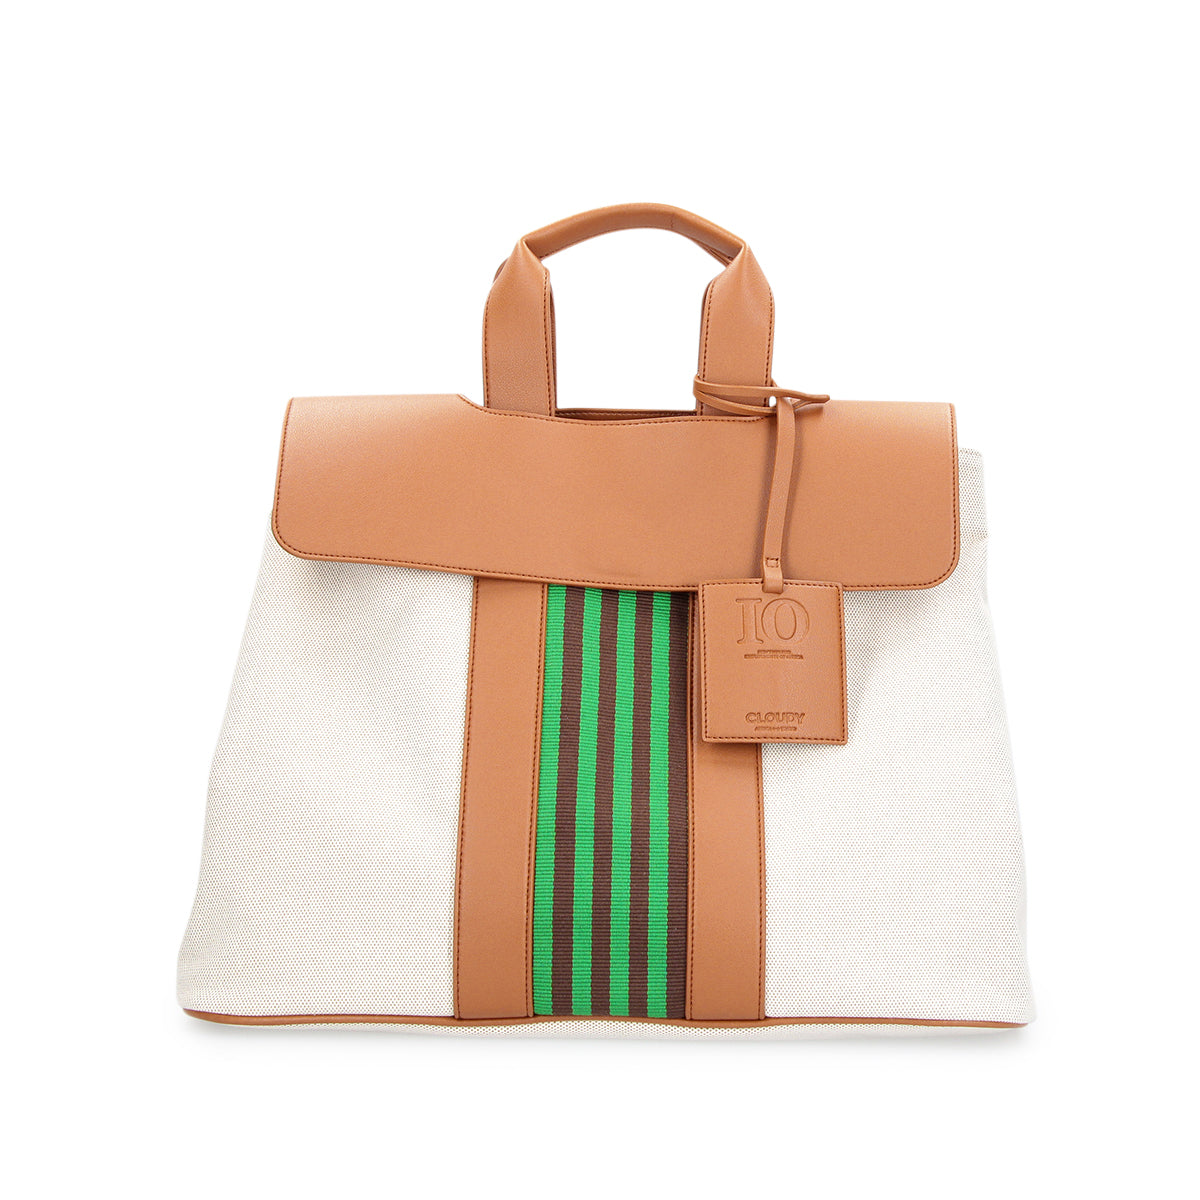 Two Tone Kente Bag (Large)BROWN | バッグ | CLOUDY公式通販サイト